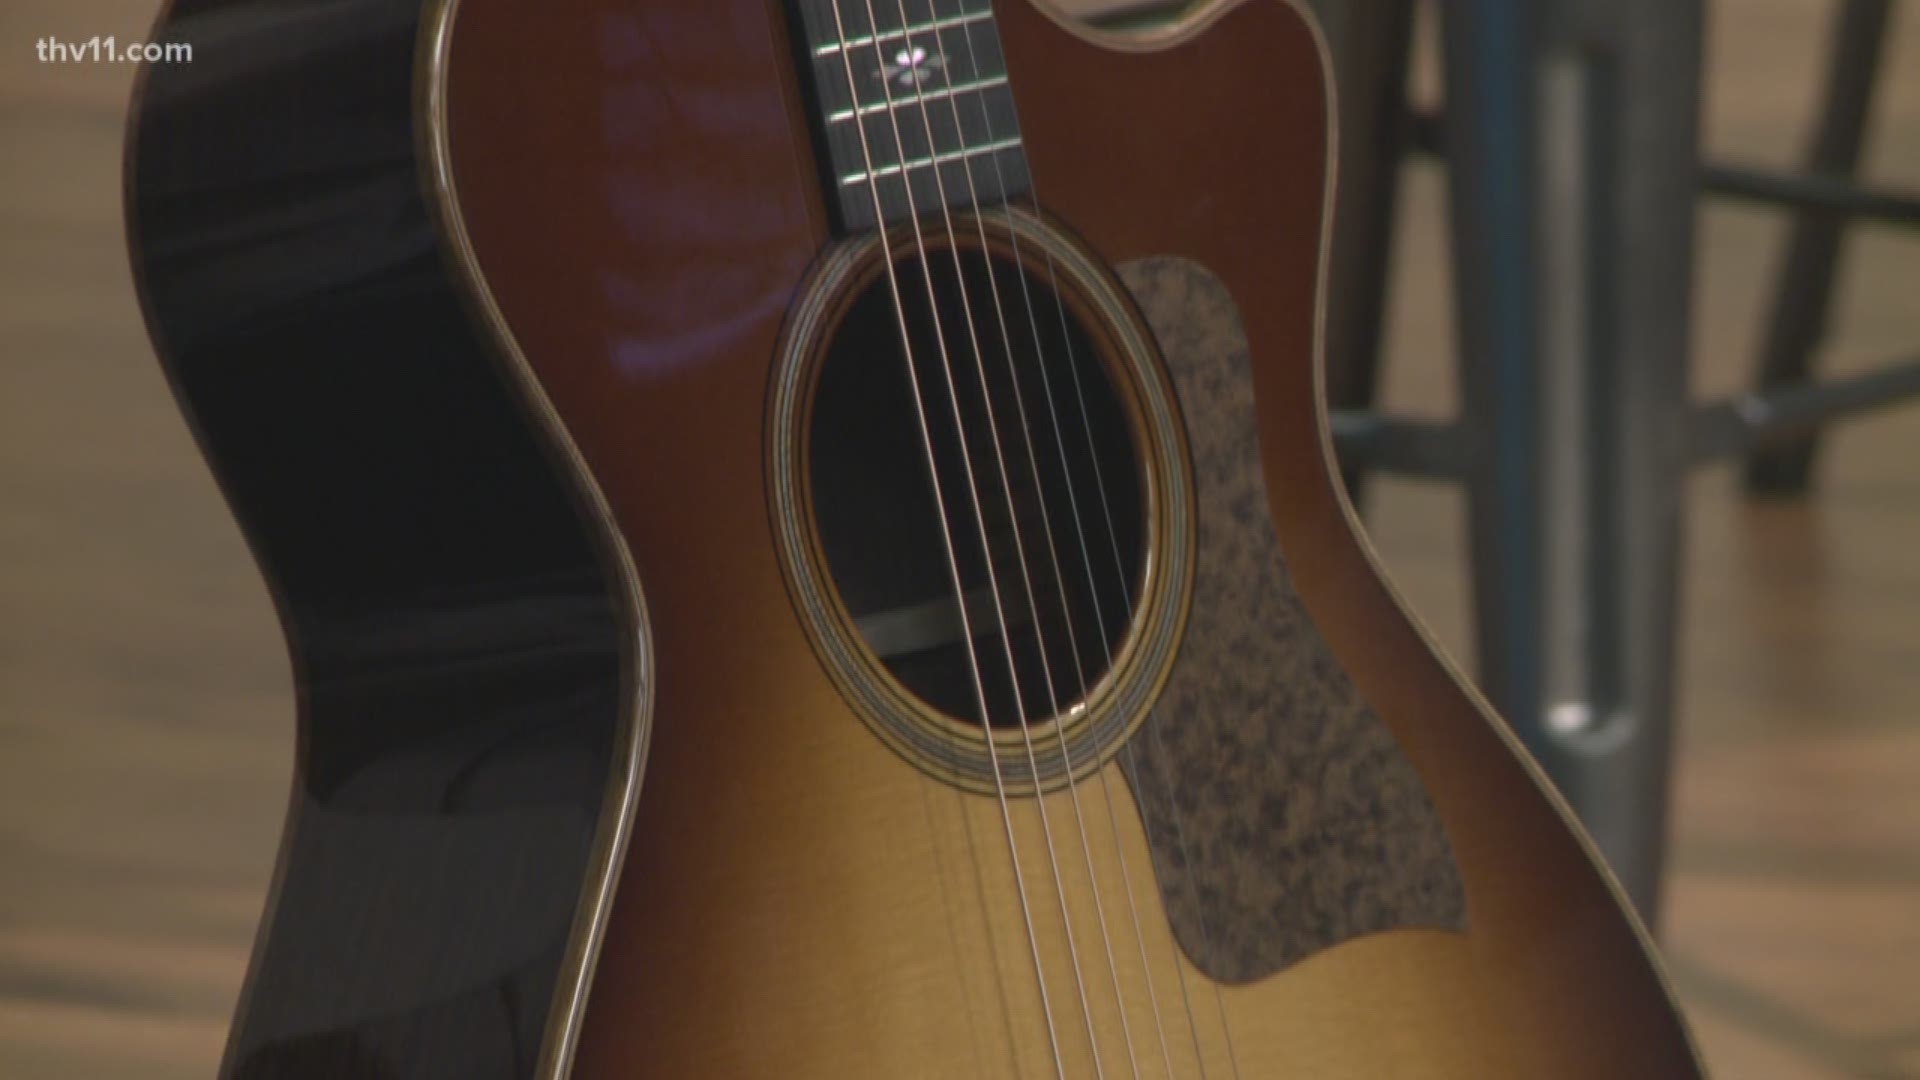 Palmer Music Co. in Conway will host Taylor Guitar experts on April 23 at 6 p.m.